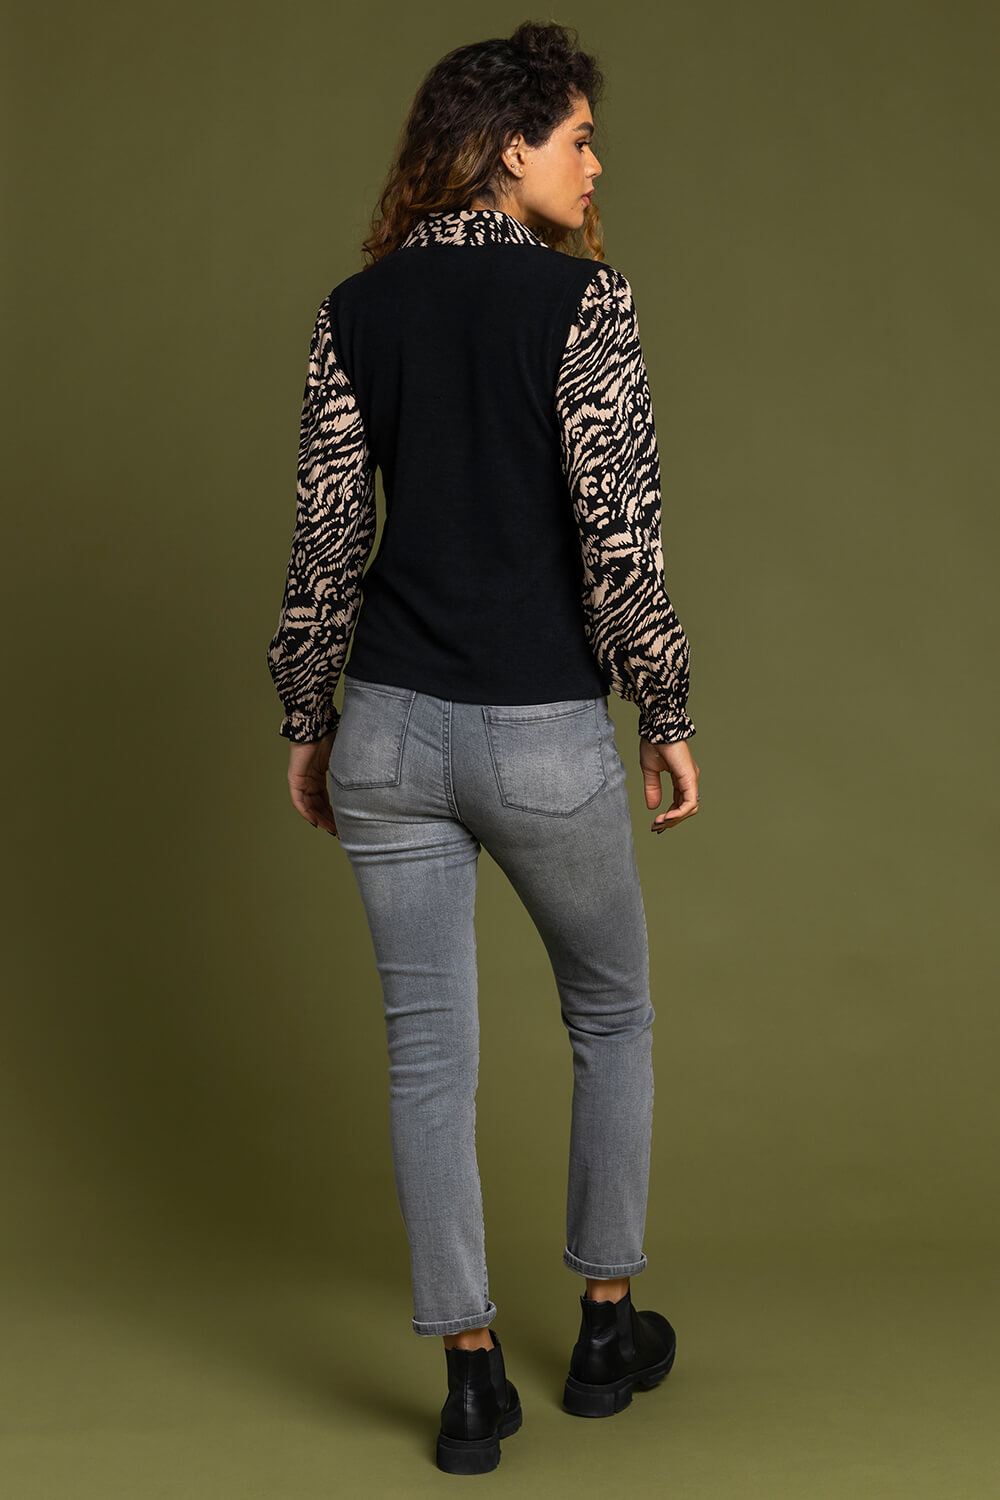 Neutral Animal Print Sweater Vest Long Sleeve Top, Image 2 of 4